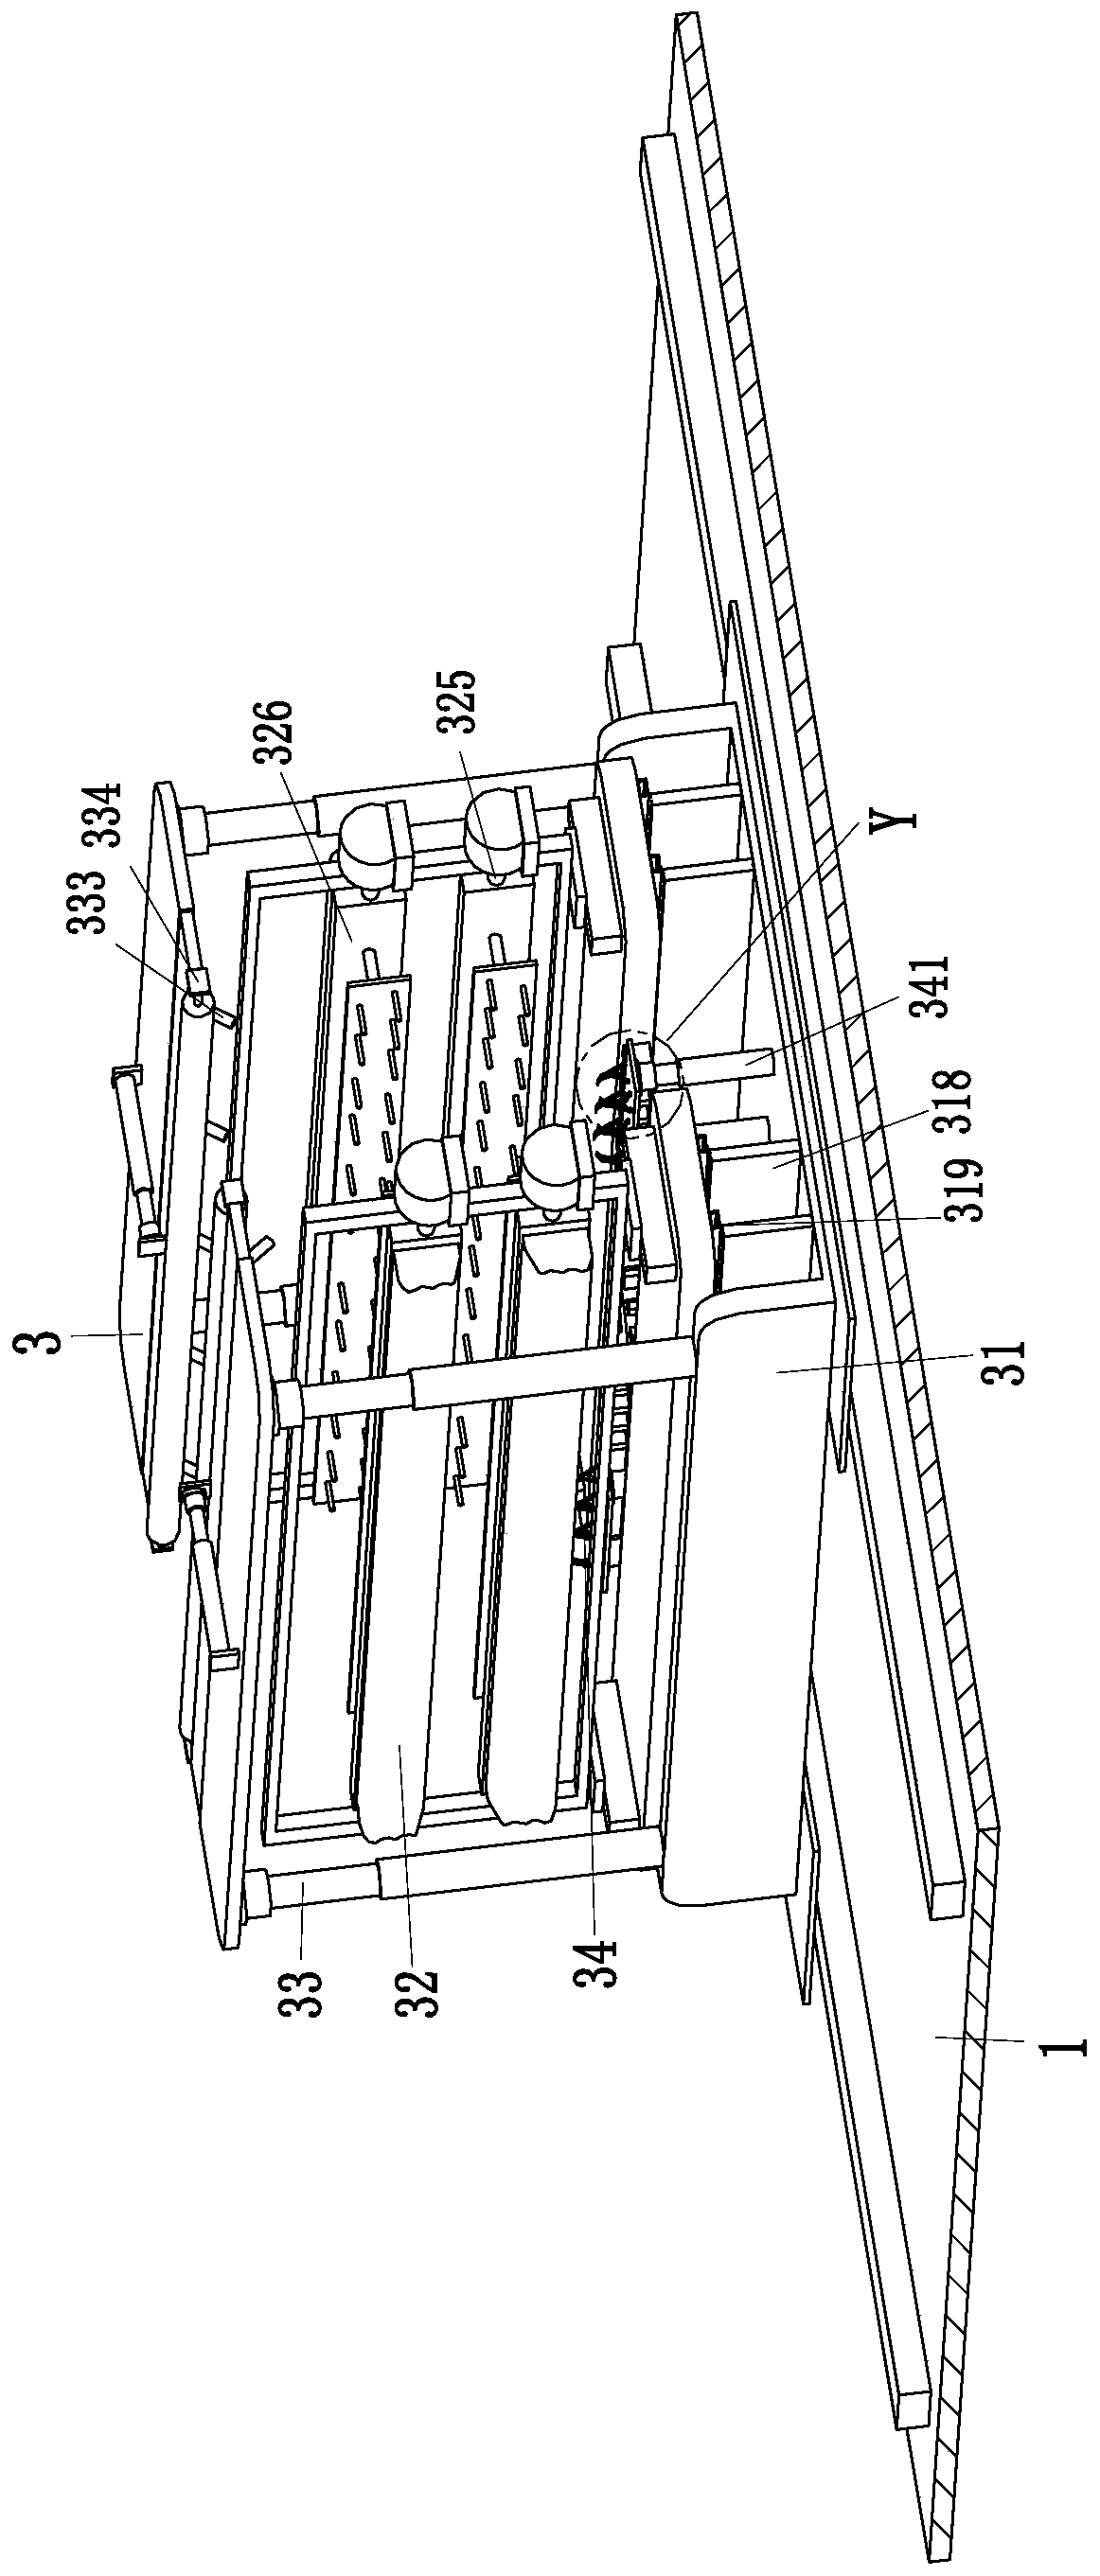 An electric power safety net maintenance device